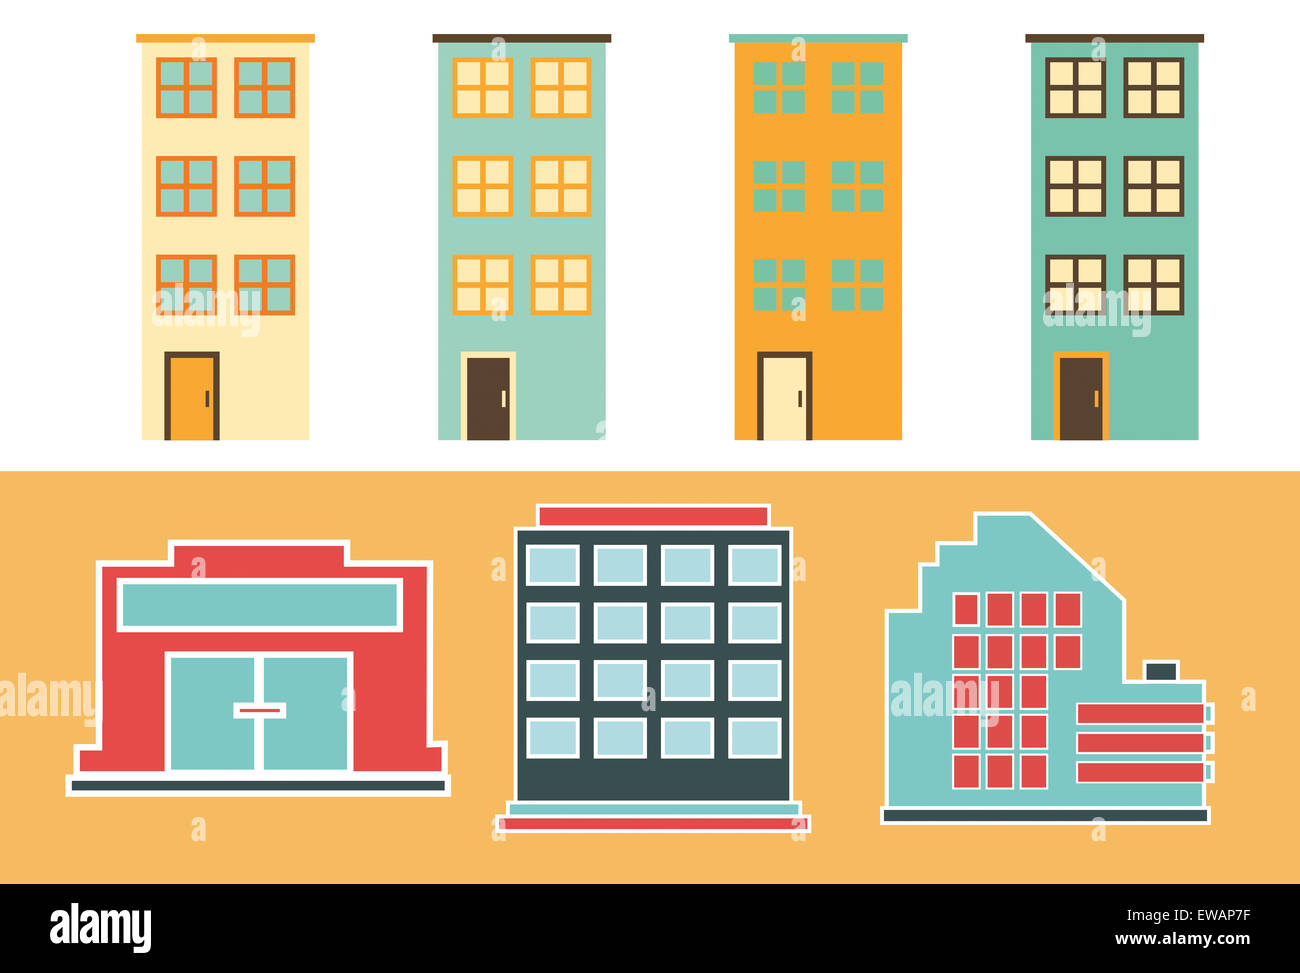 Flat icons of Residential and Office buildings. Stock Photo